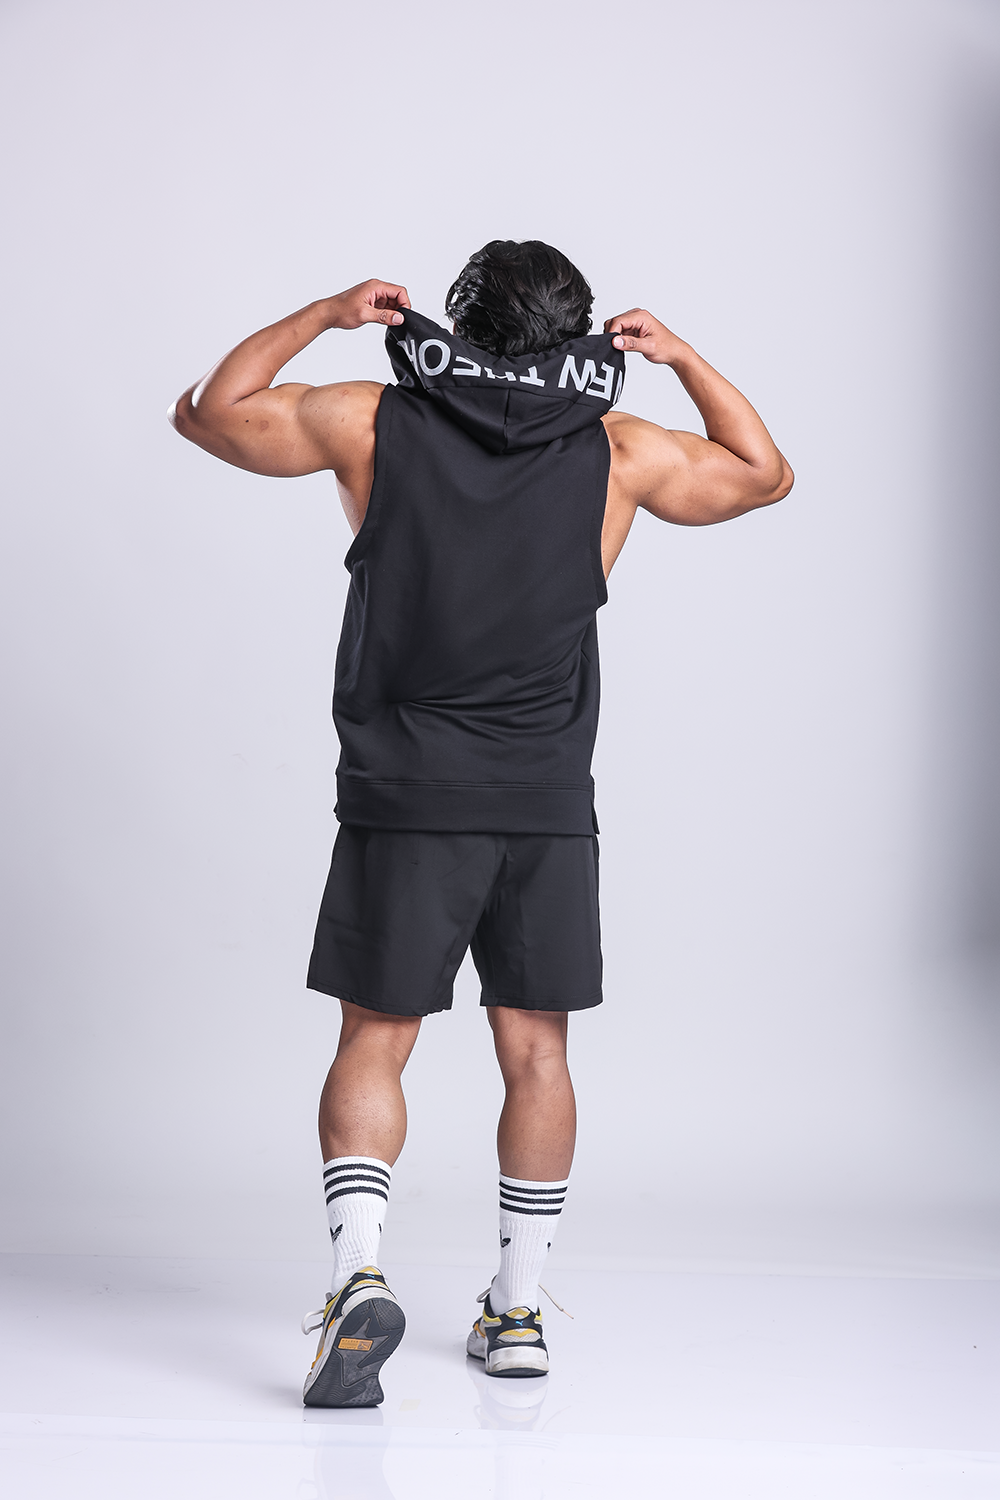 Buy Athletic Training Sleeveless Hoodie- Black for Men Online @Best Price  in India: New Theory – New Theory